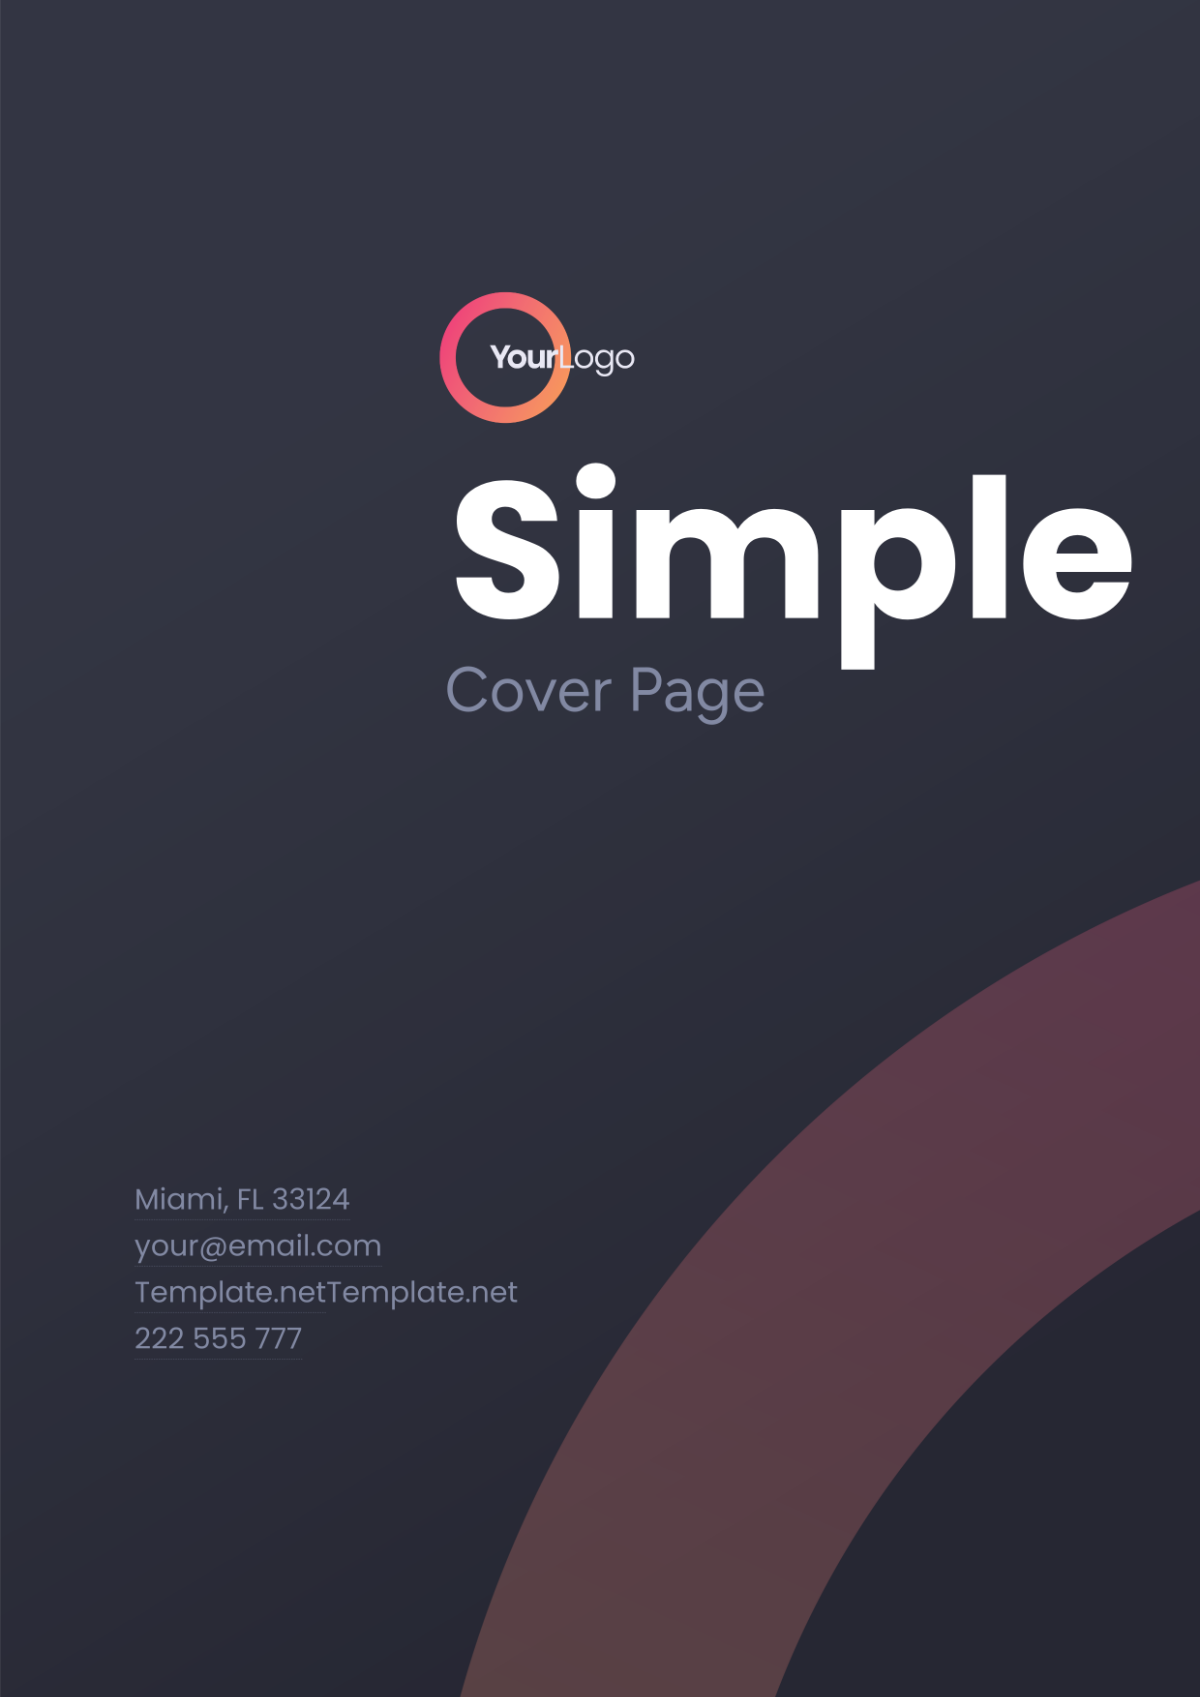 Simple Cover Page Logo Template